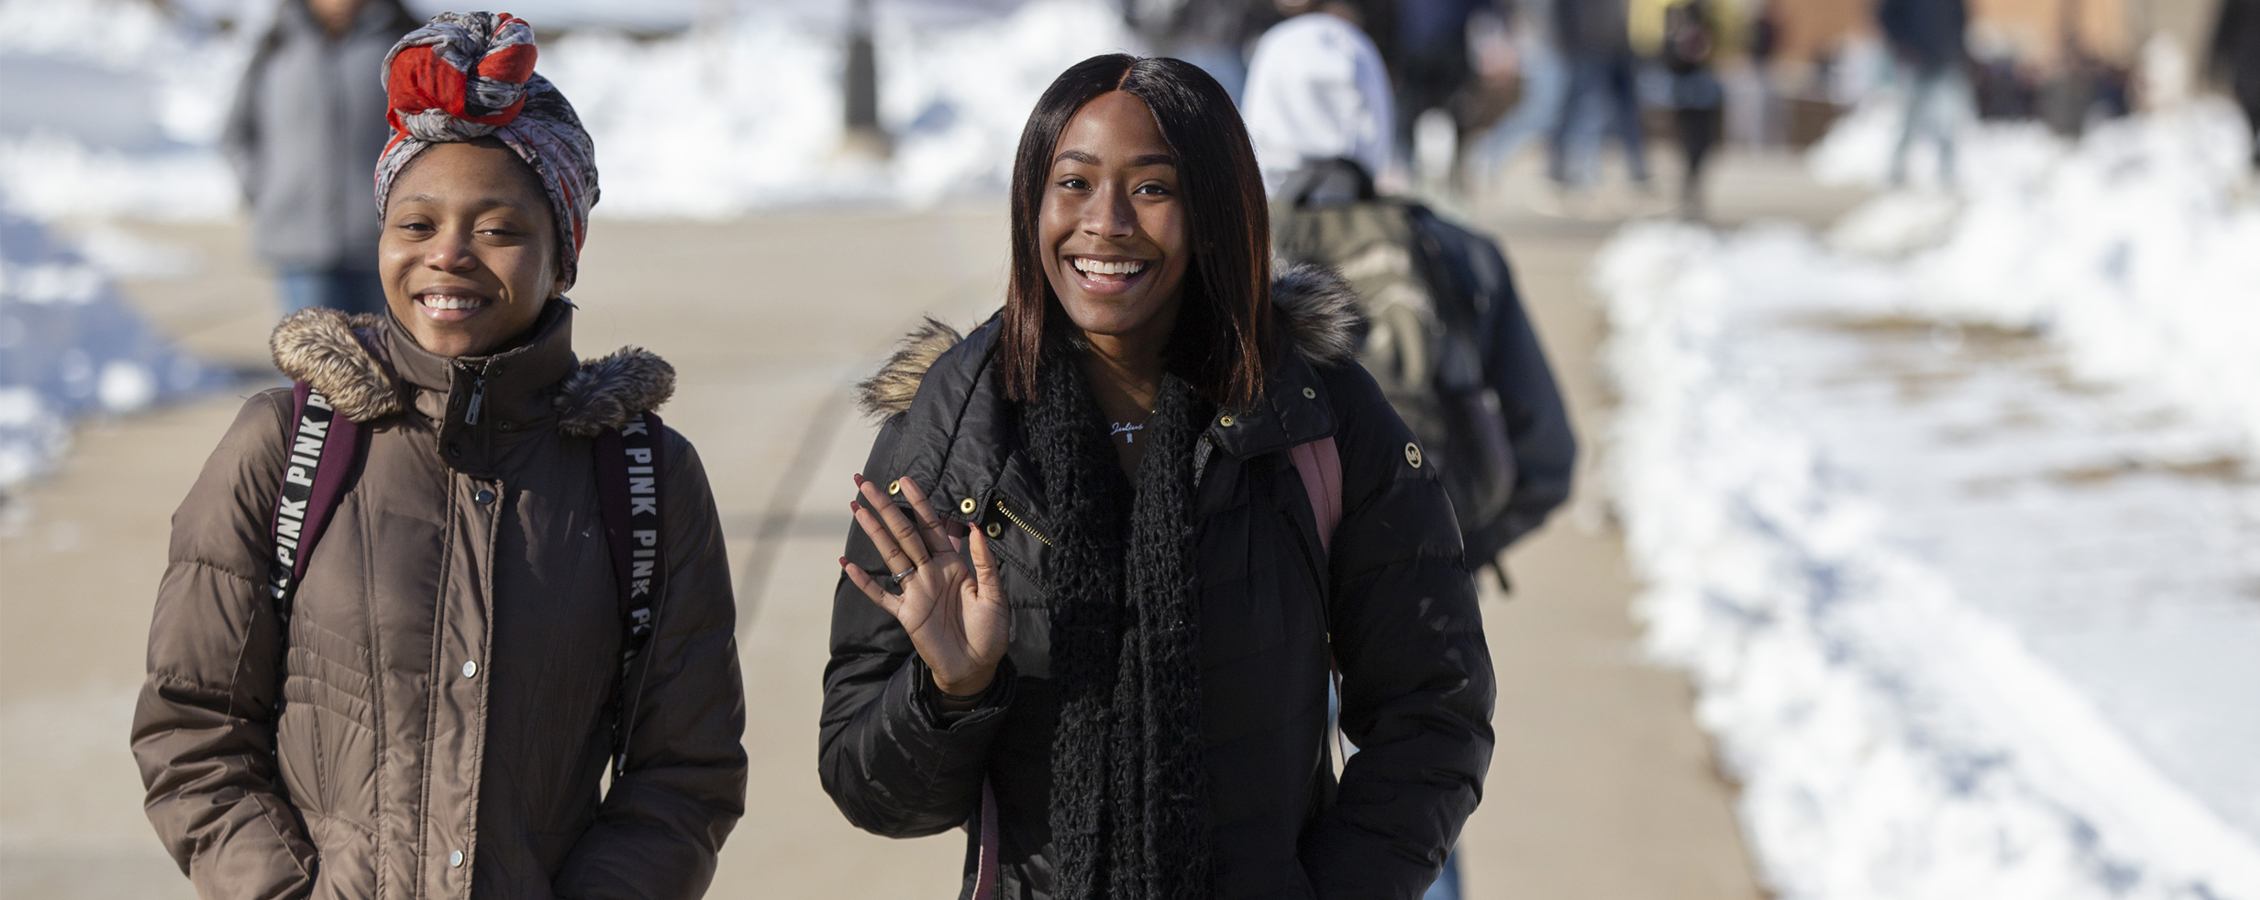 Two students walk outside wearing winter jackets and smile at the camera.